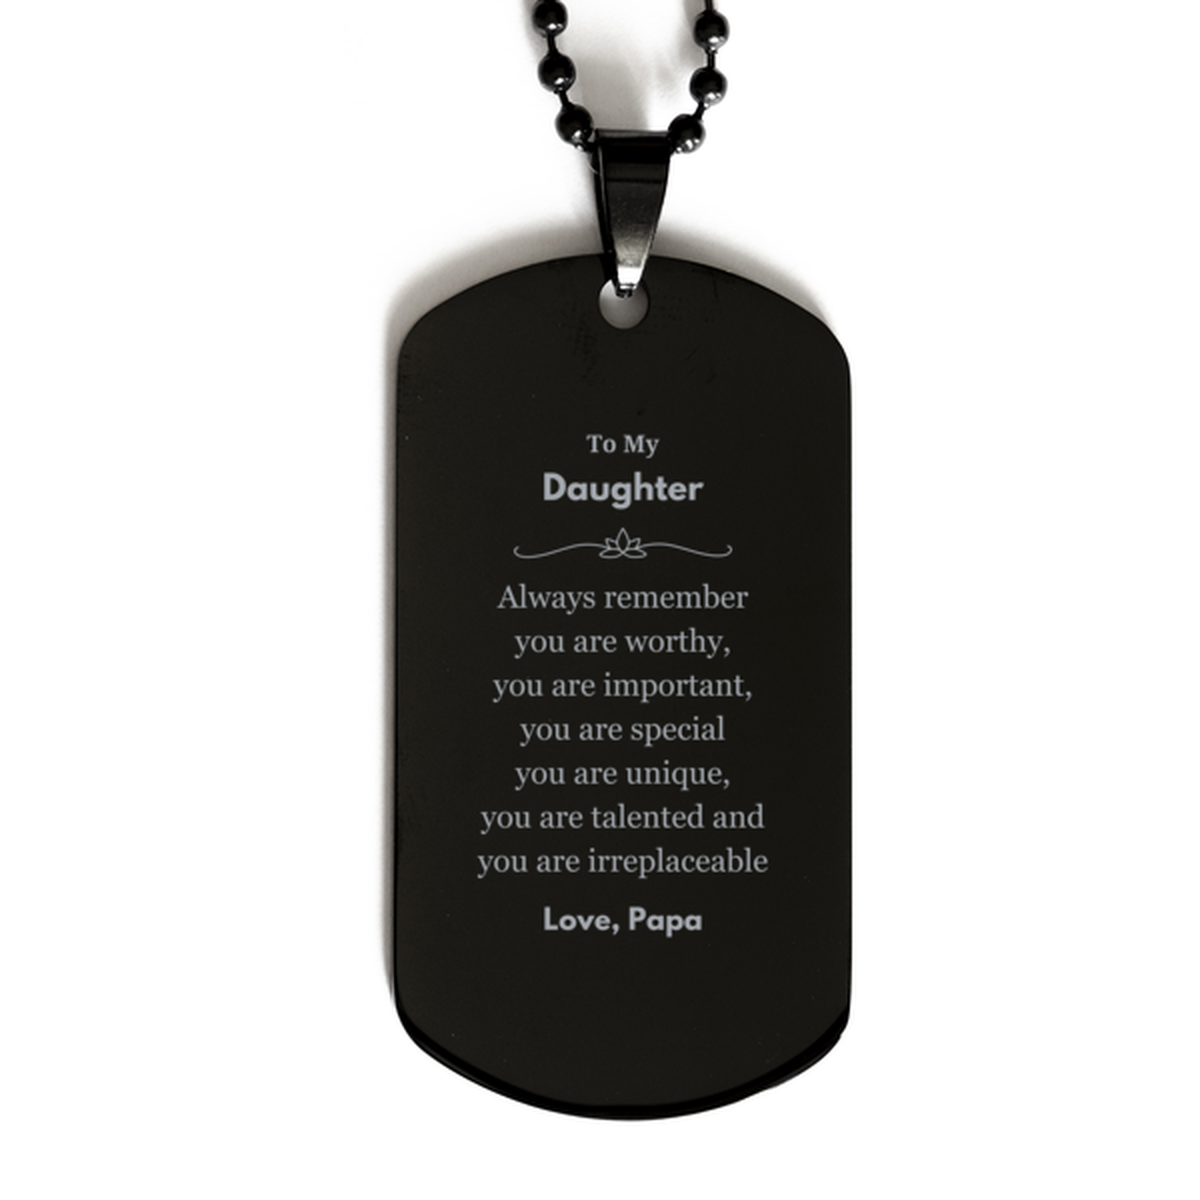 Daughter Birthday Gifts from Papa, Inspirational Black Dog Tag for Daughter Christmas Graduation Gifts for Daughter Always remember you are worthy, you are important. Love, Papa